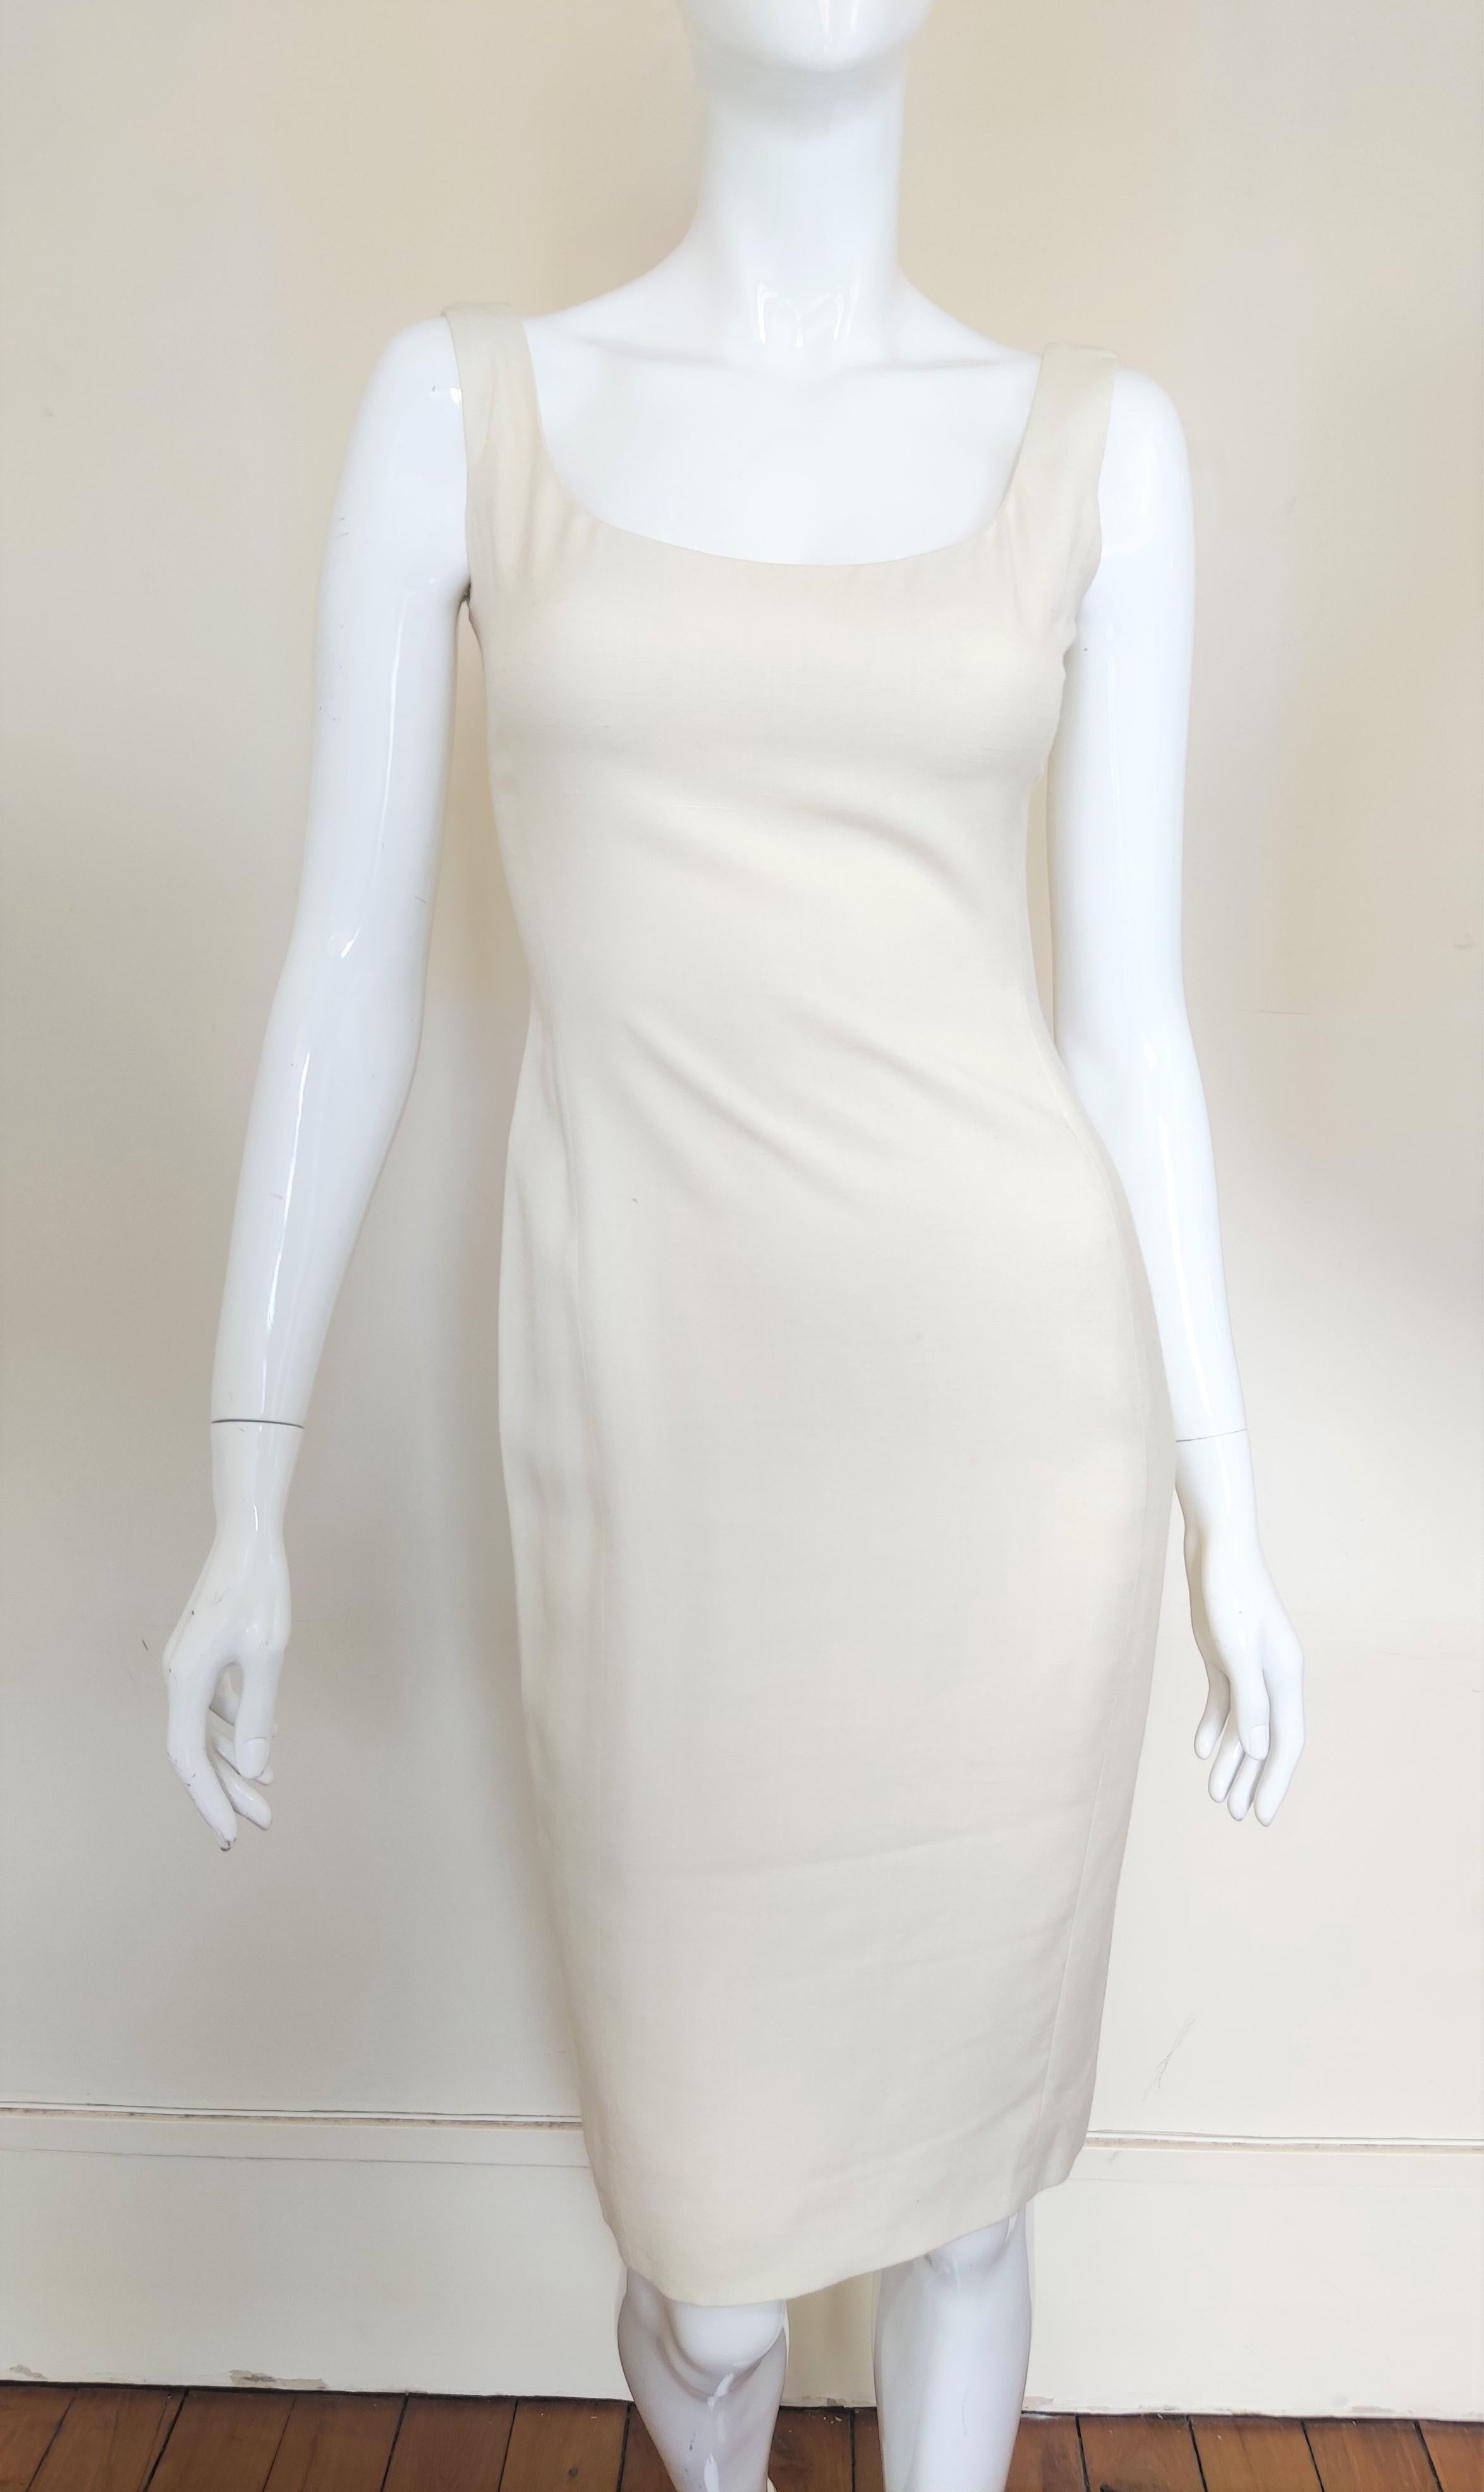 Gray Early John Galliano S/S 1999 Runway Vintage Ivory Ensemble Dress Costume Suit For Sale